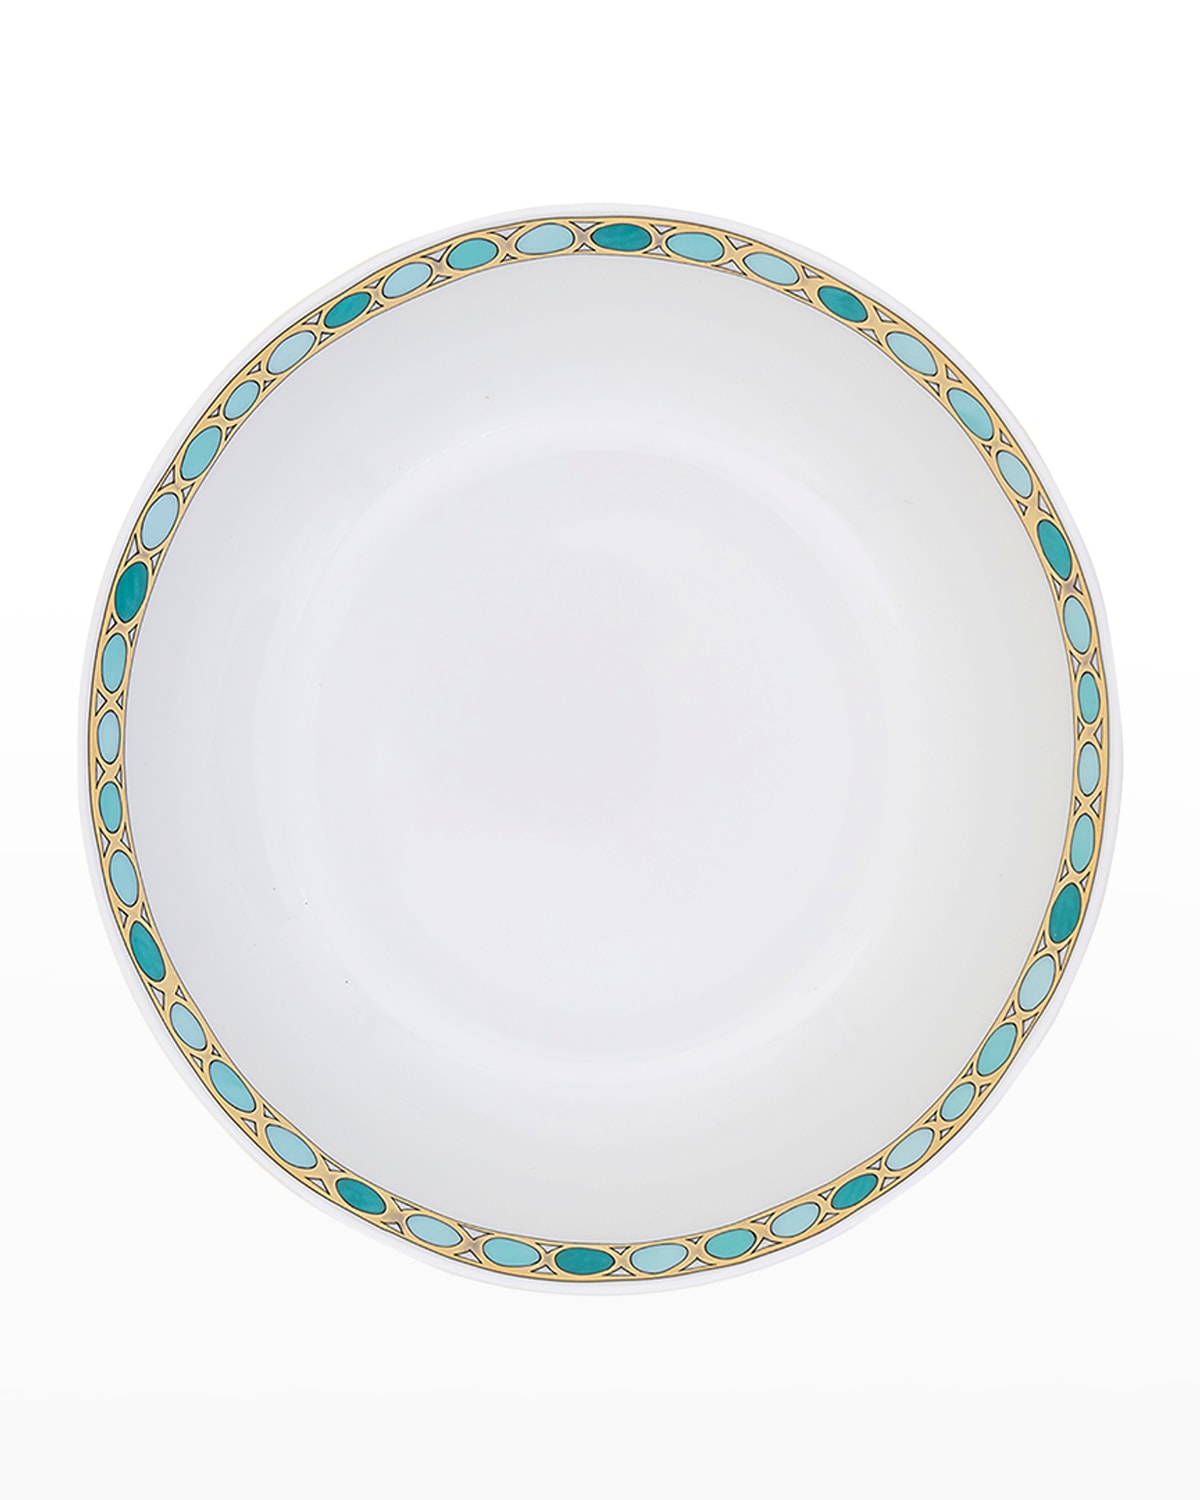 Haviland & Parlon Syracuse Turquoise Cereal Bowl In White